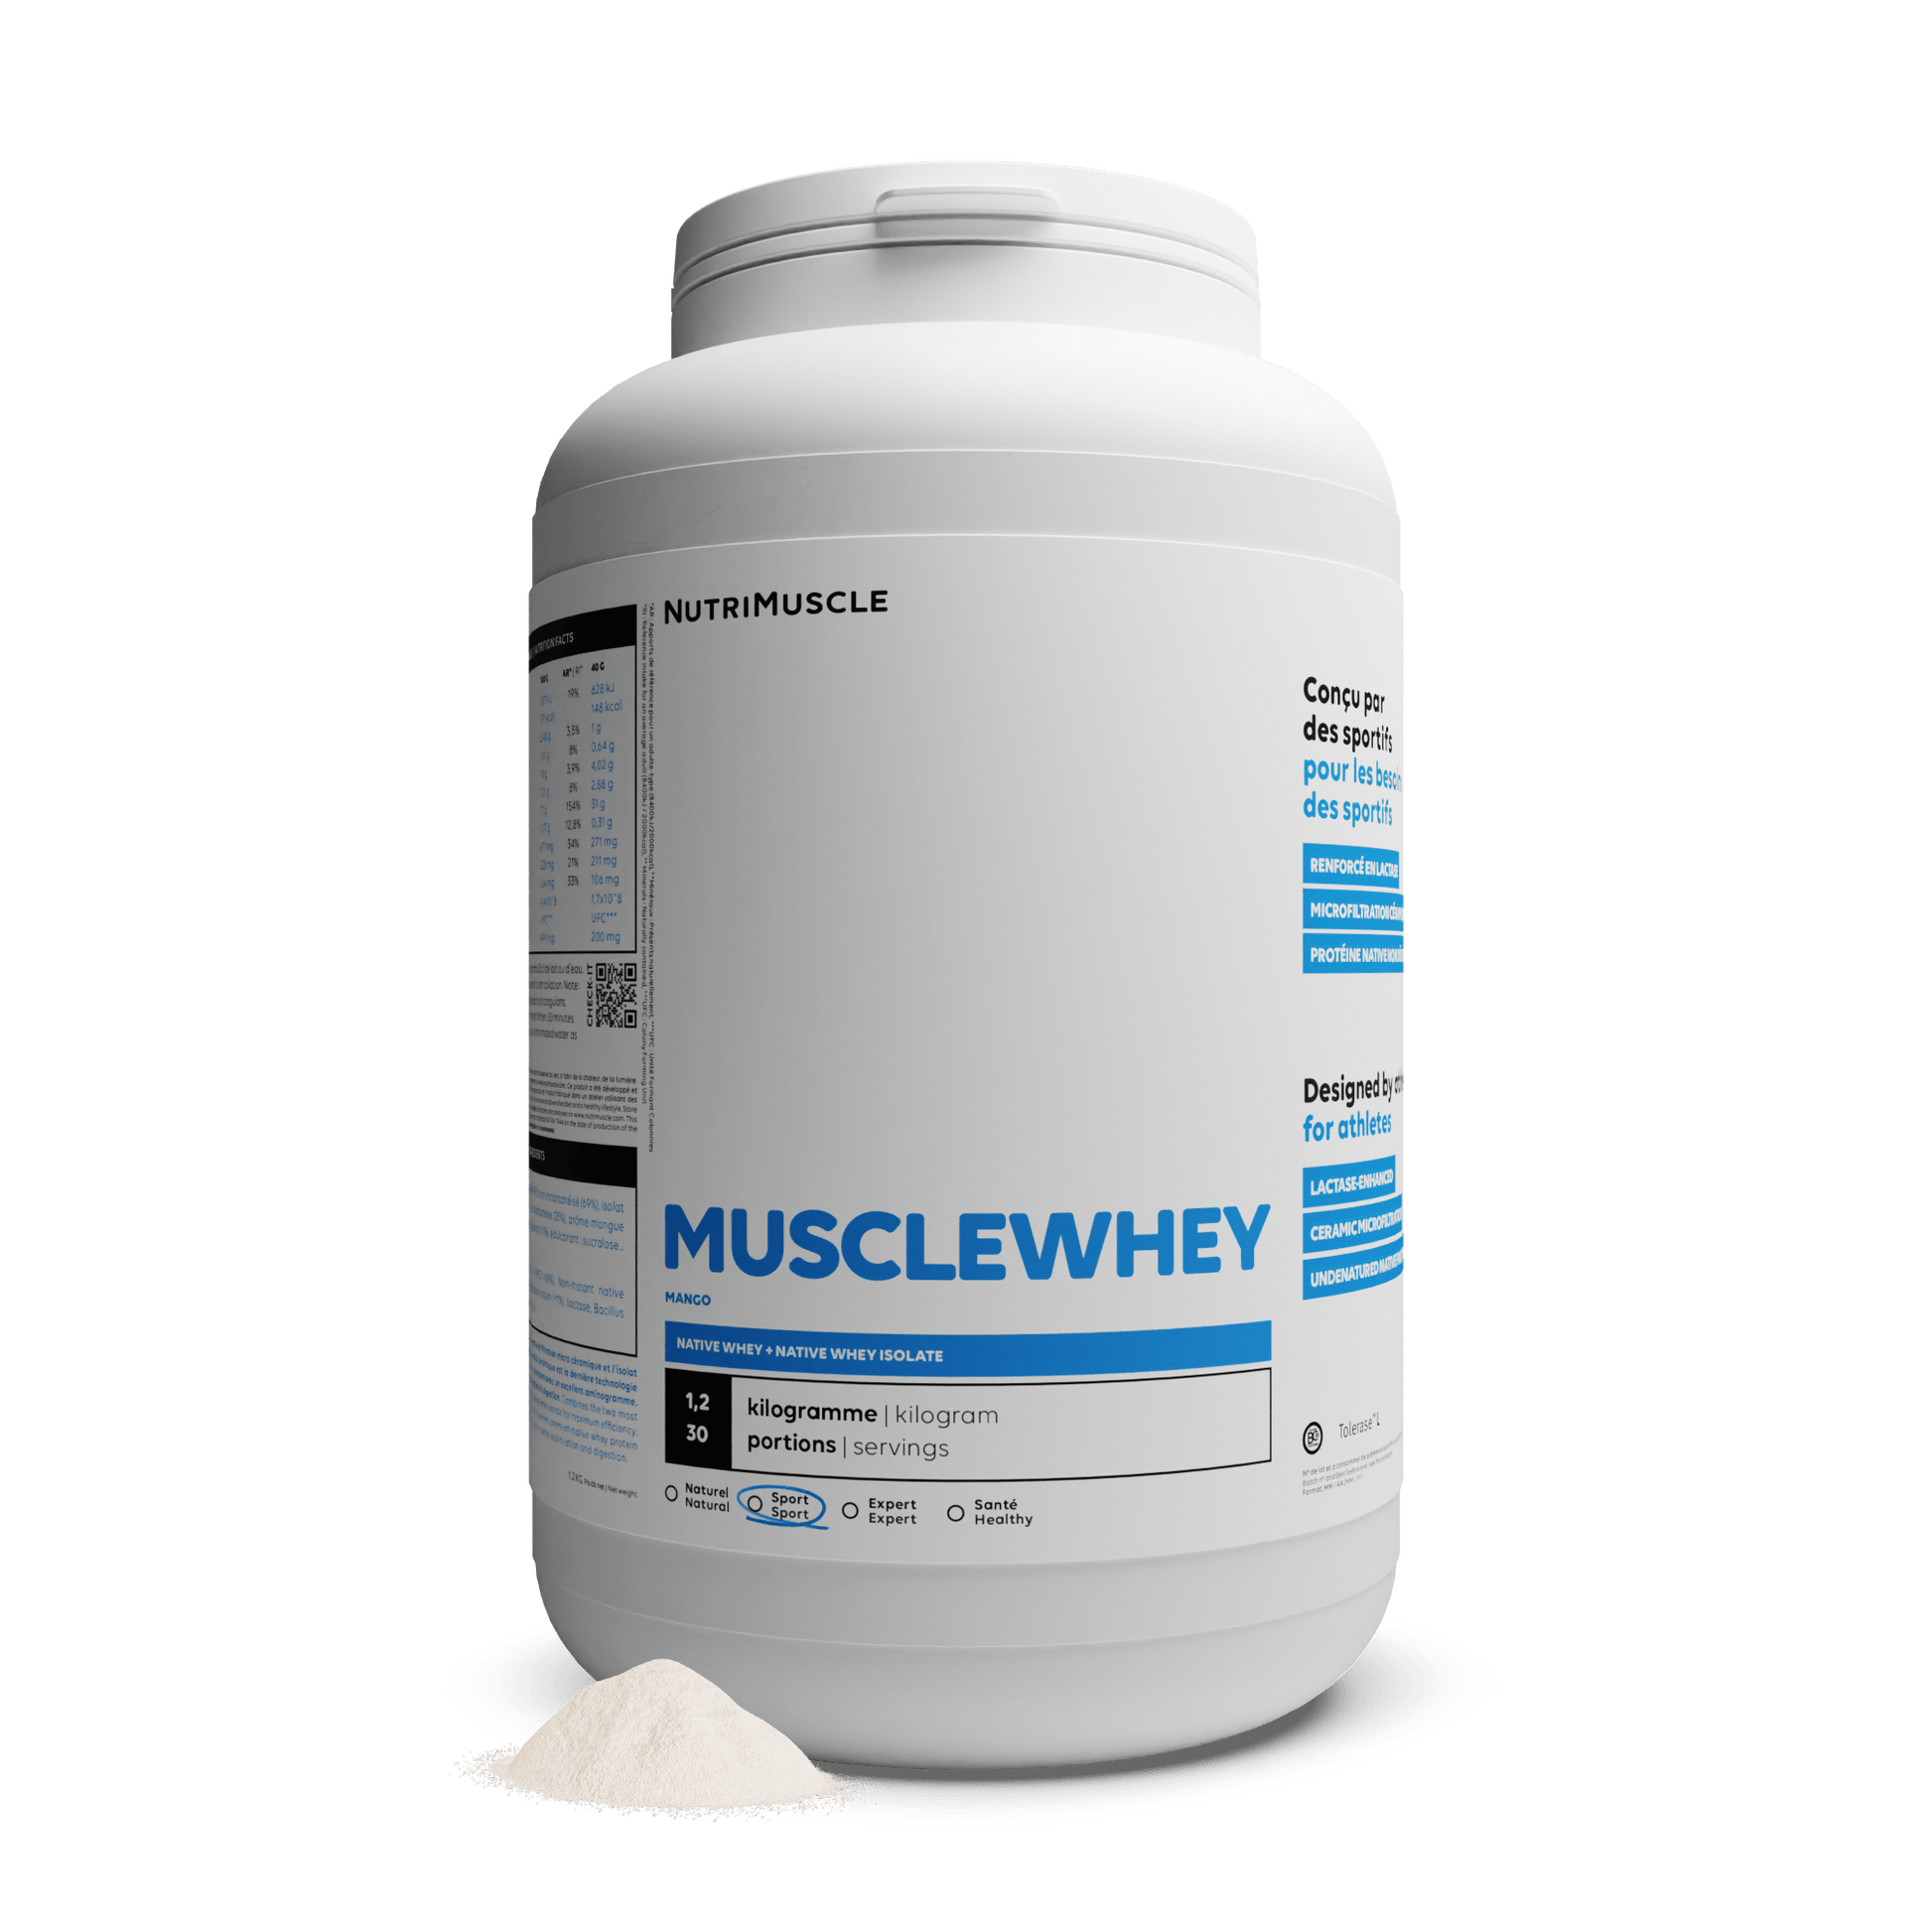 Nutrimuscle Protéines Mangue / 1.20 kg Musclewhey - Mix Protein